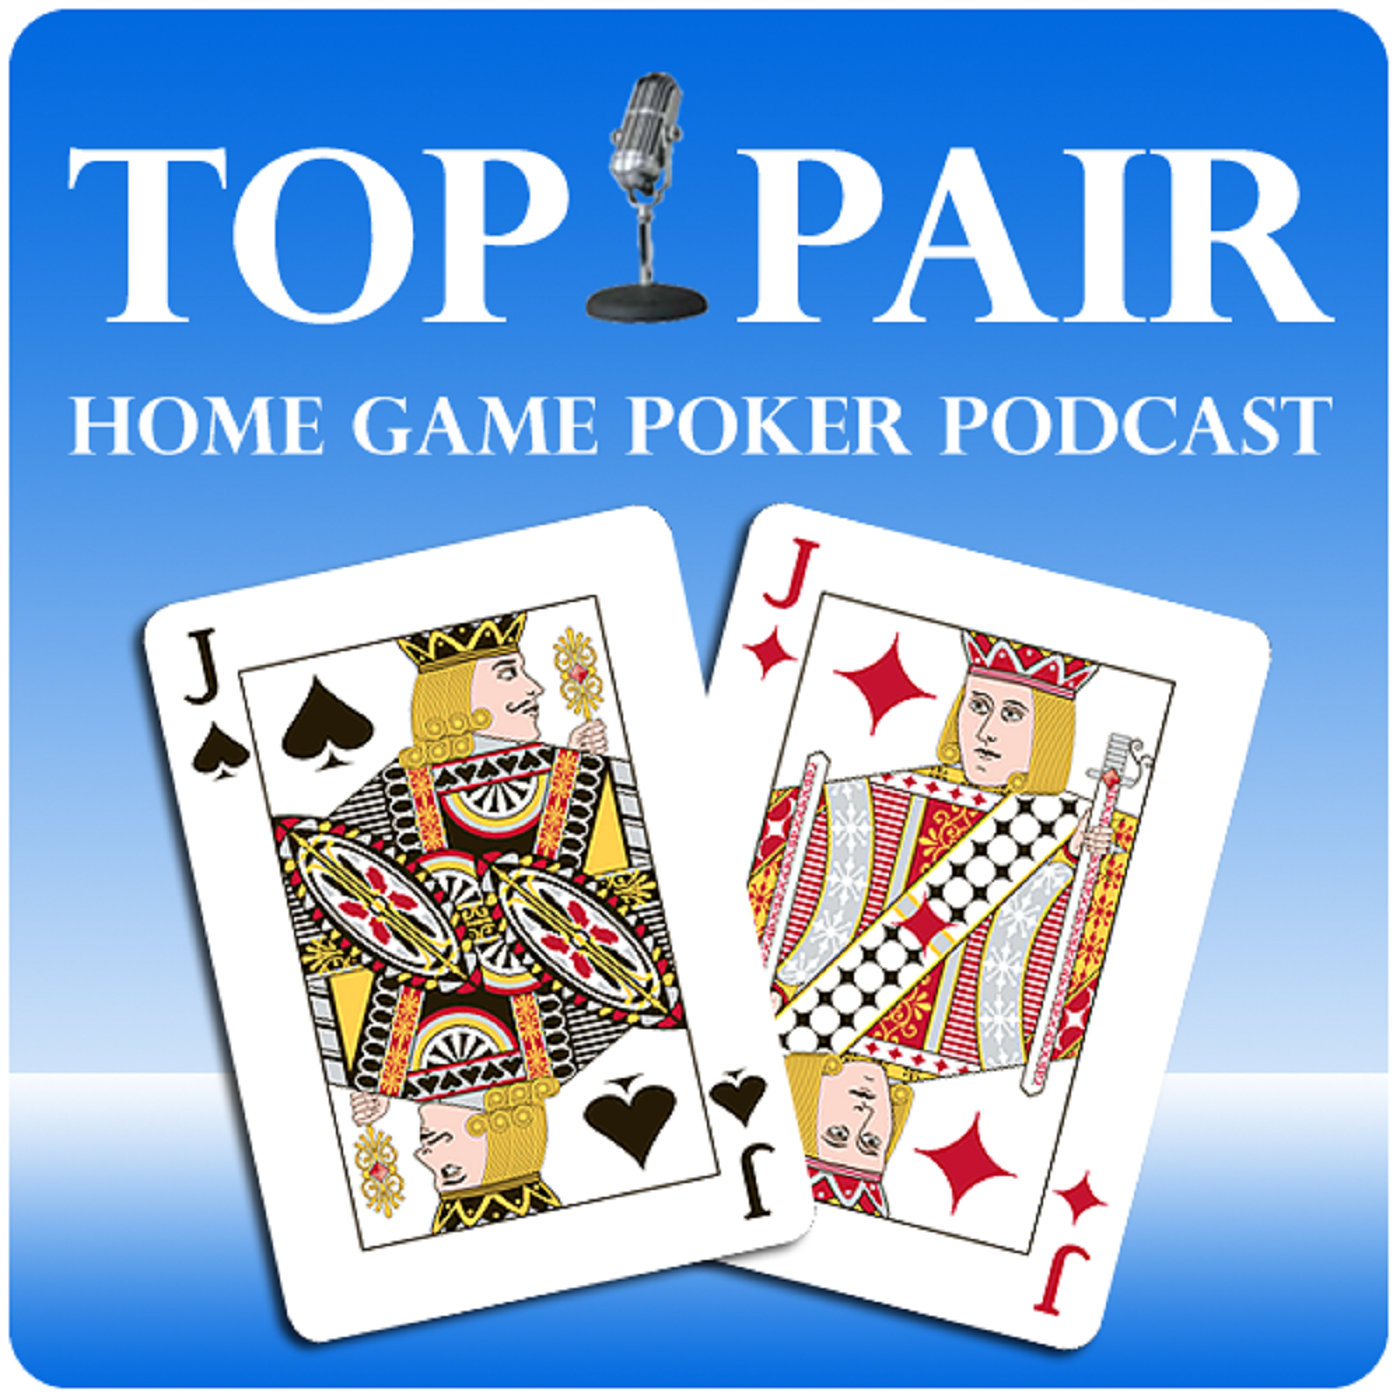 Top Pair Home Game Poker Podcast